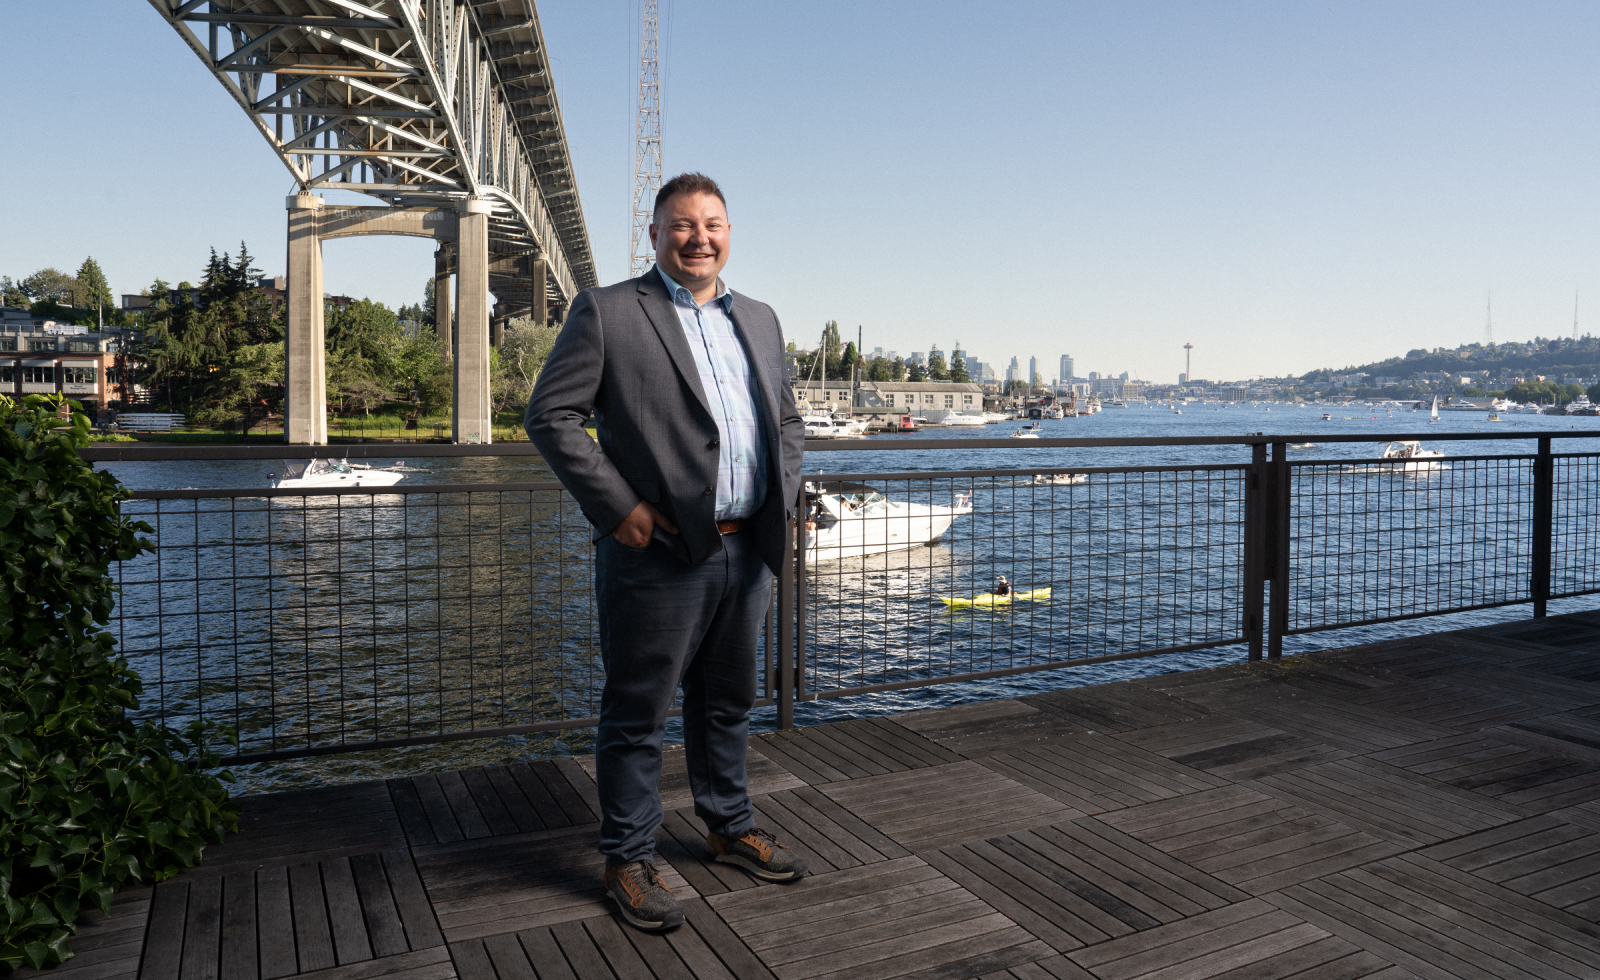 Erik R. Stegman, chief executive officer of Native Americans in Philanthropy, wears a suit and smiles for a photo. A body of water with boats is behind him. 